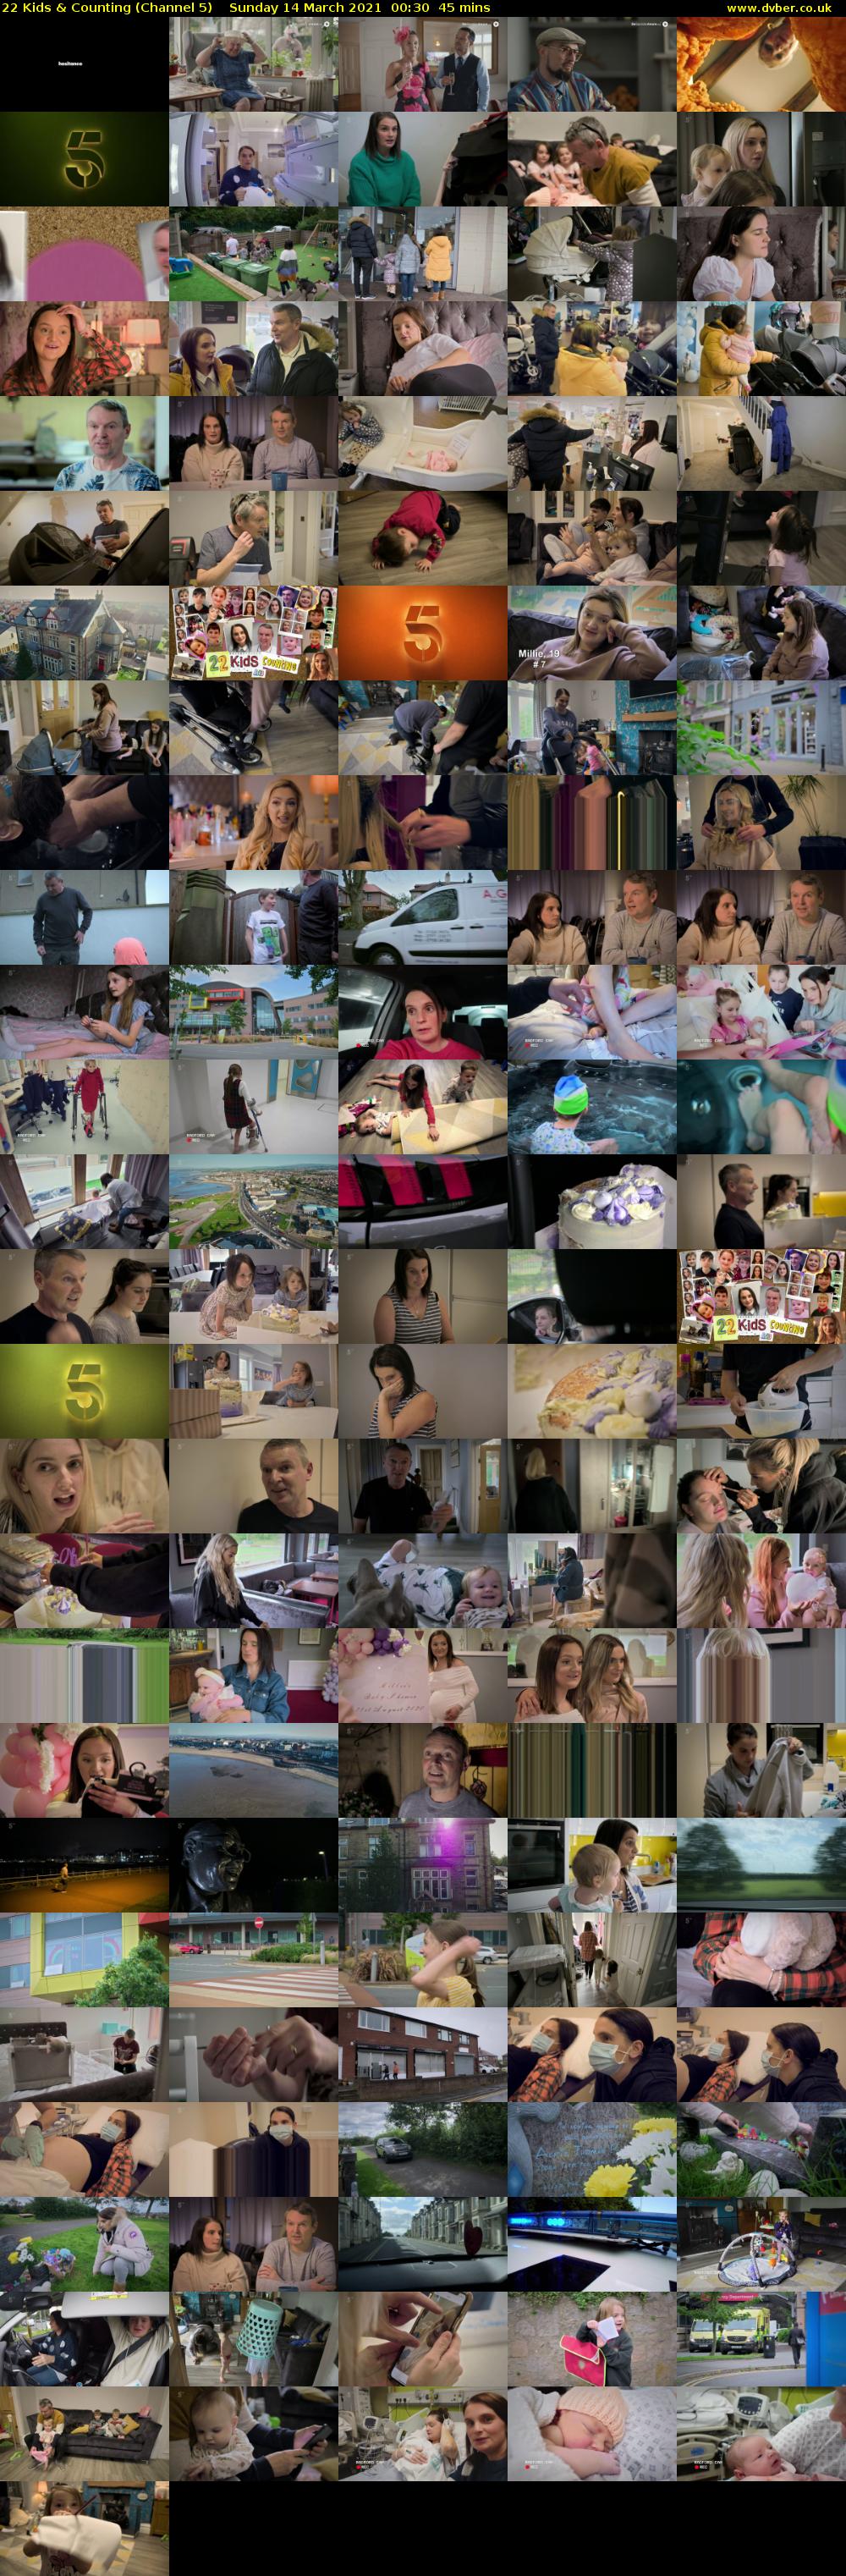 22 Kids & Counting (Channel 5) Sunday 14 March 2021 00:30 - 01:15